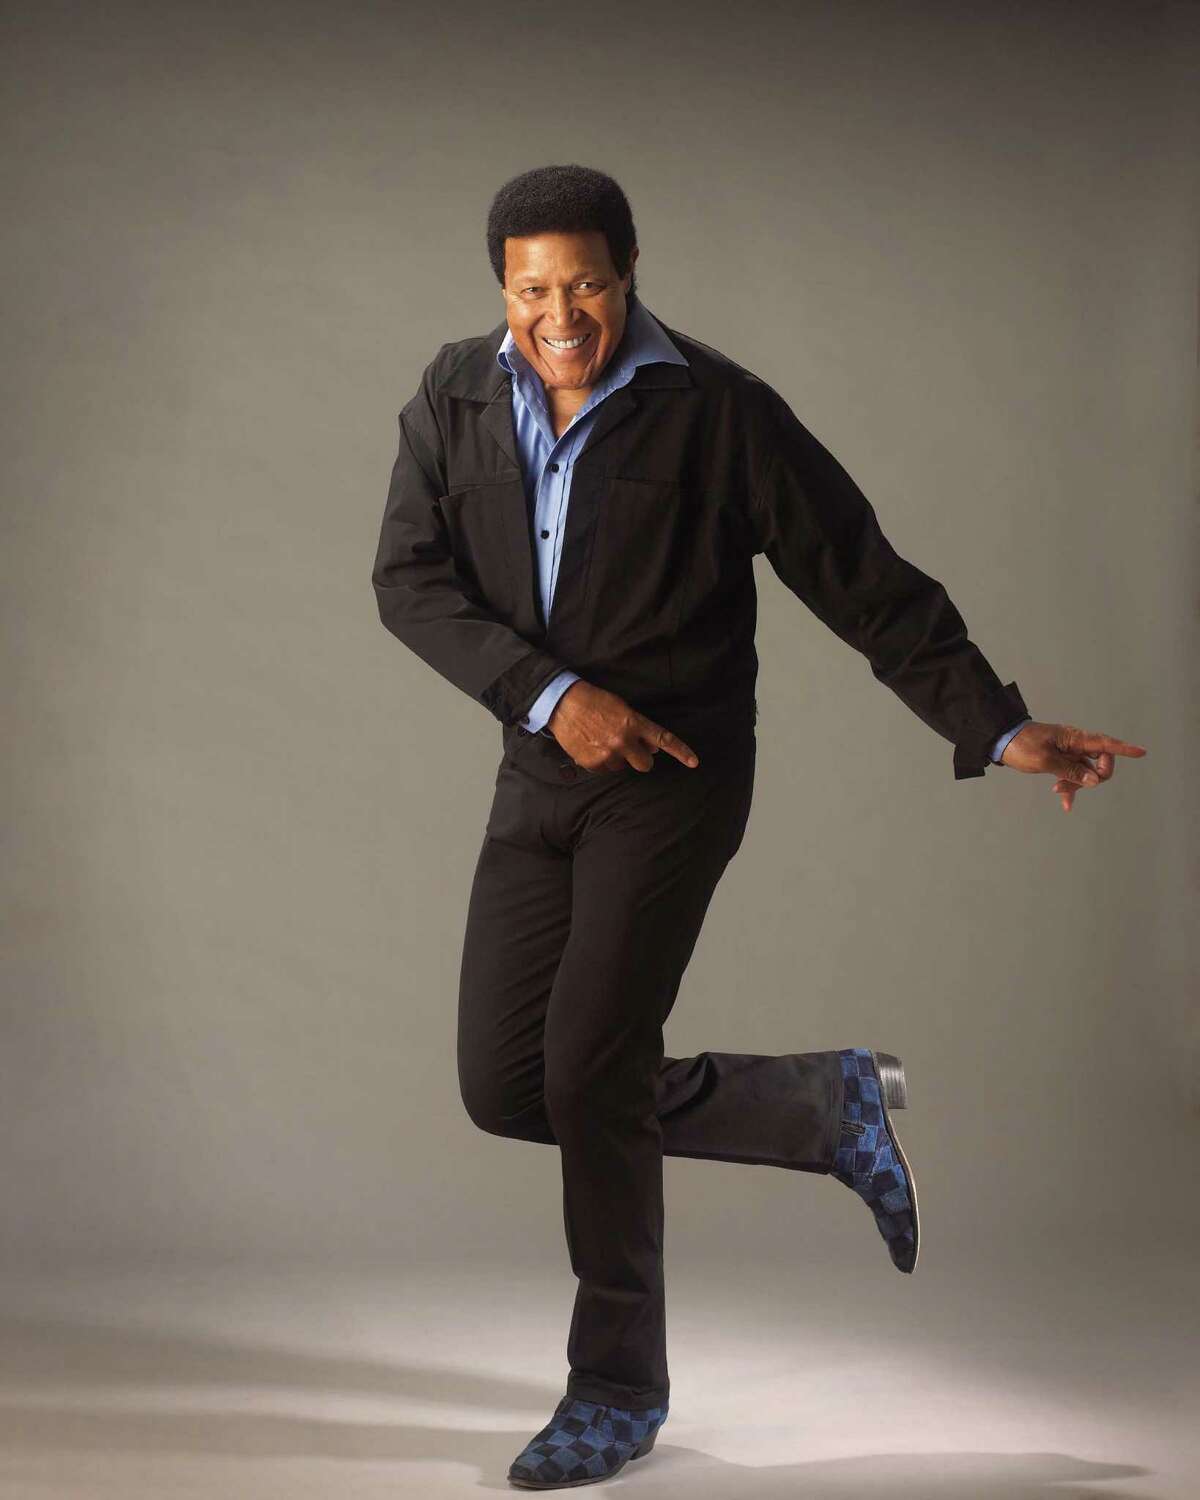 Chubby Checker will perform at the Wolf Den at Mohegan Sun on Dec. 28.